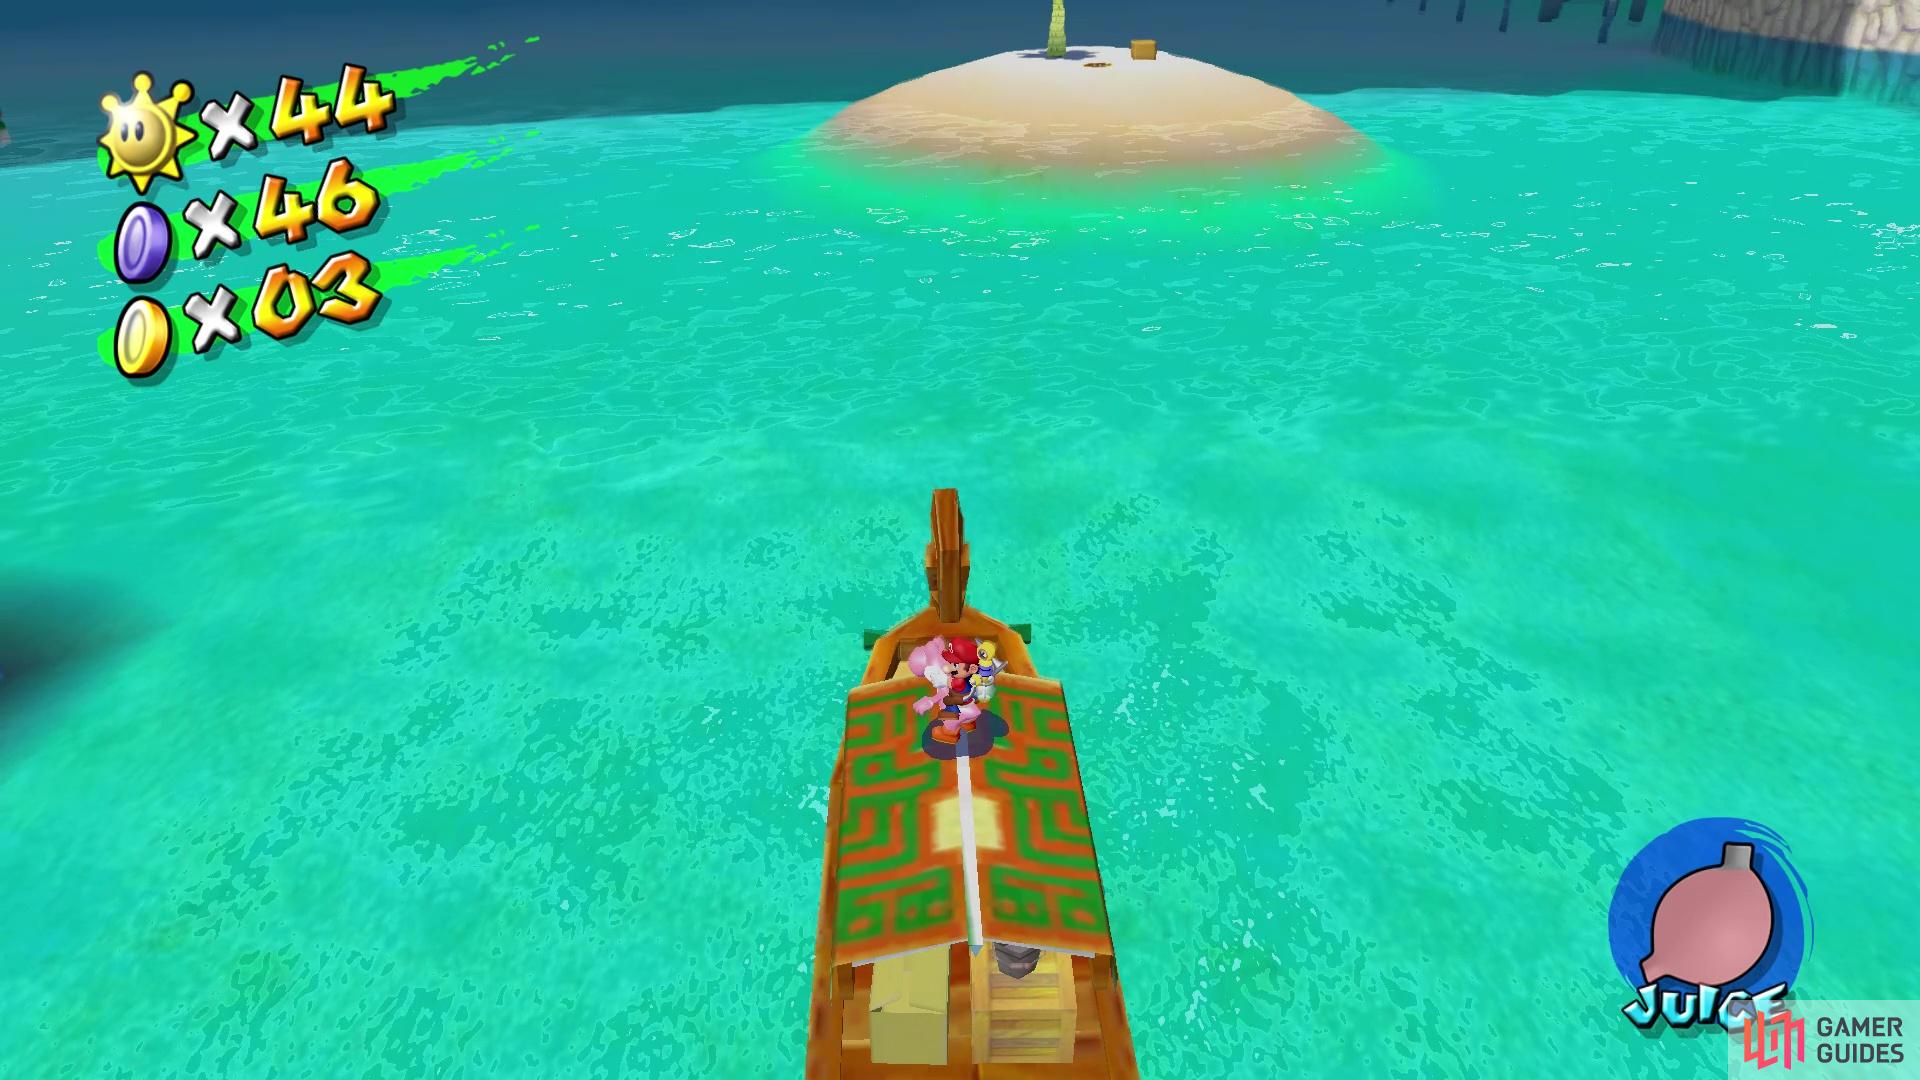 You'll have to use the boats to get to the island